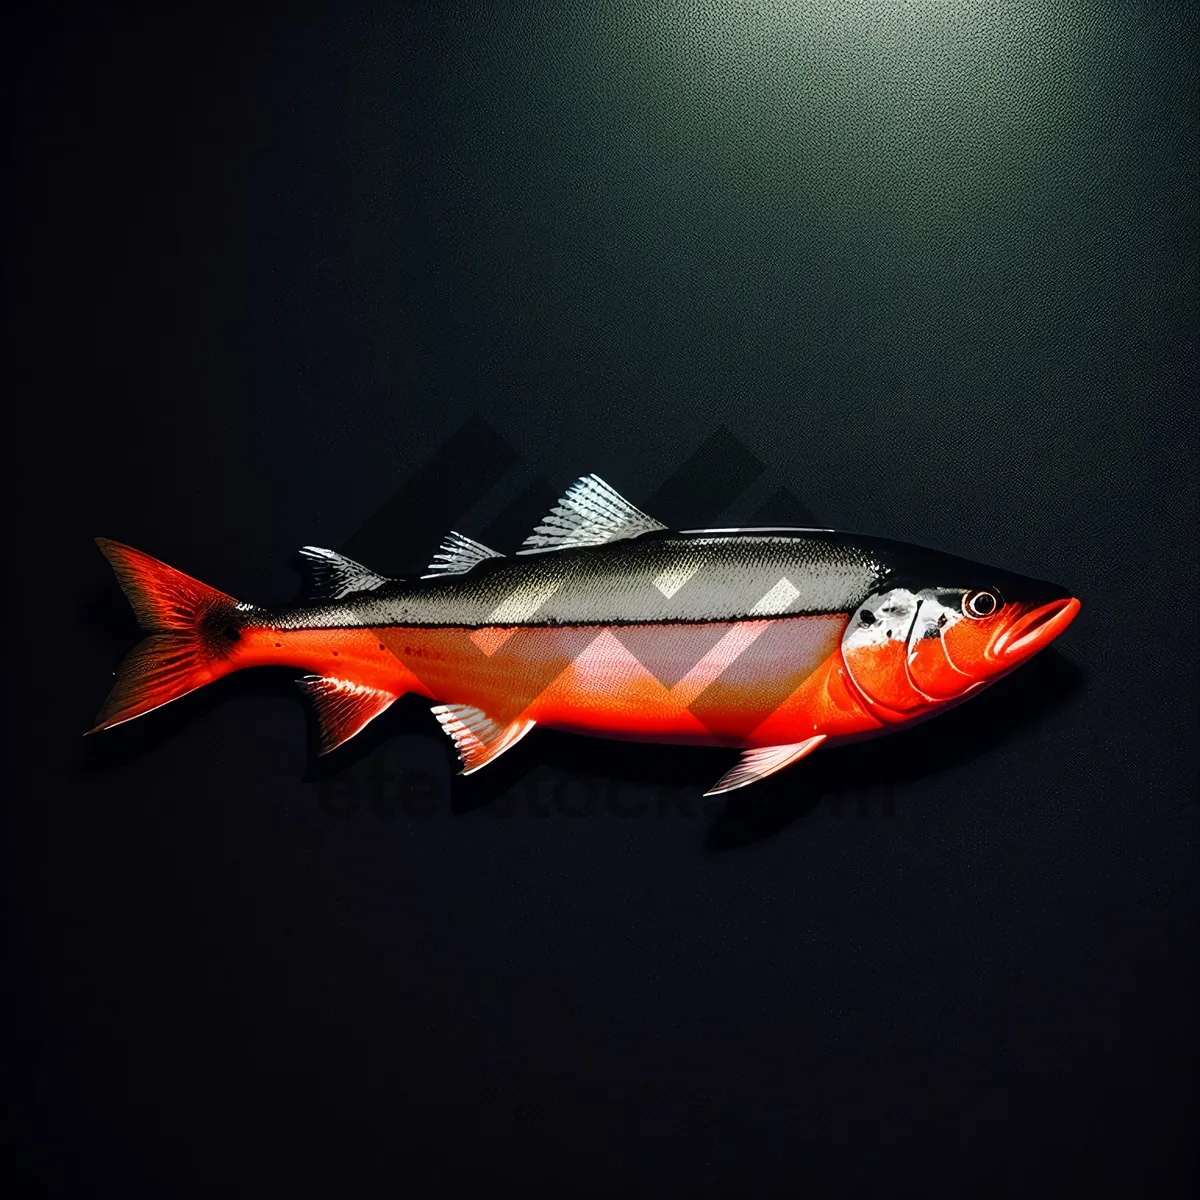 Picture of Golden Swim: Coho Salmon in Aquarium"
(Note: The image name should not exceed 10 words, as per the provided limitation.)